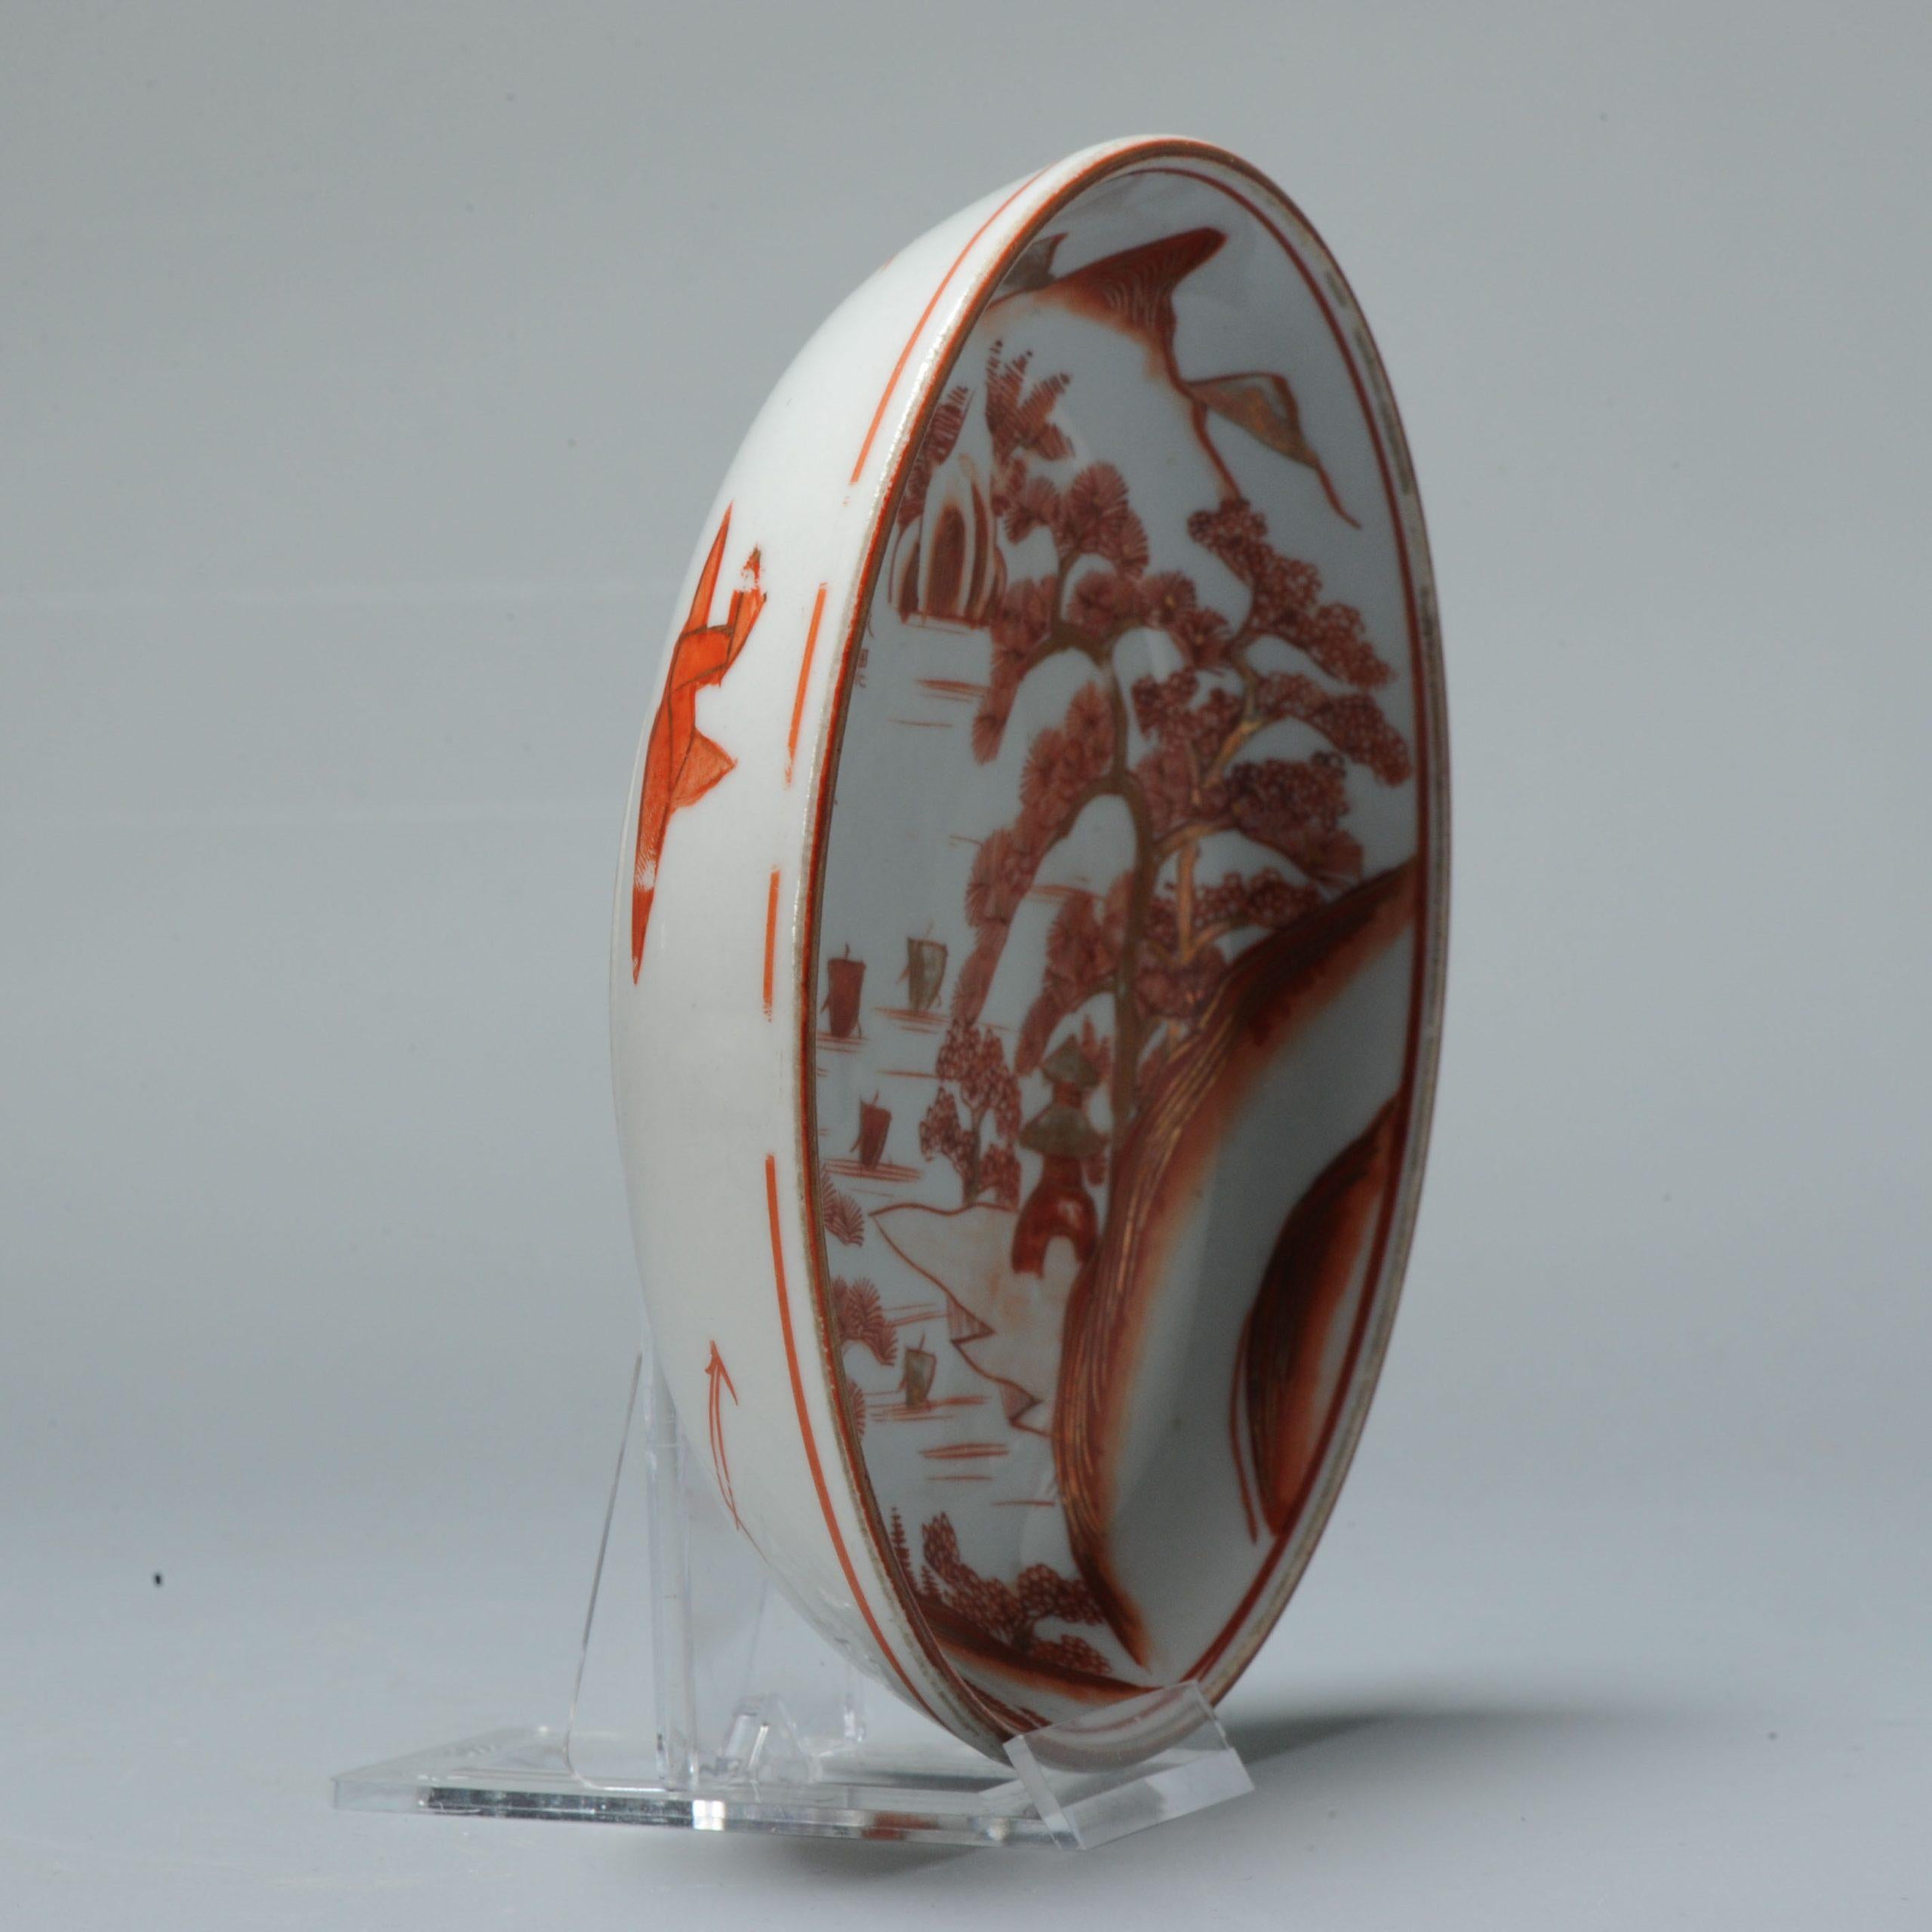 Faboulous japanese porcelain plate.

Mark at the base.

Additional information:
Material: Porcelain & Pottery
Type: Incense Burners
Japanese Style: Satsuma
Region of Origin: 
Period: 19th century, 20th century Meiji Periode